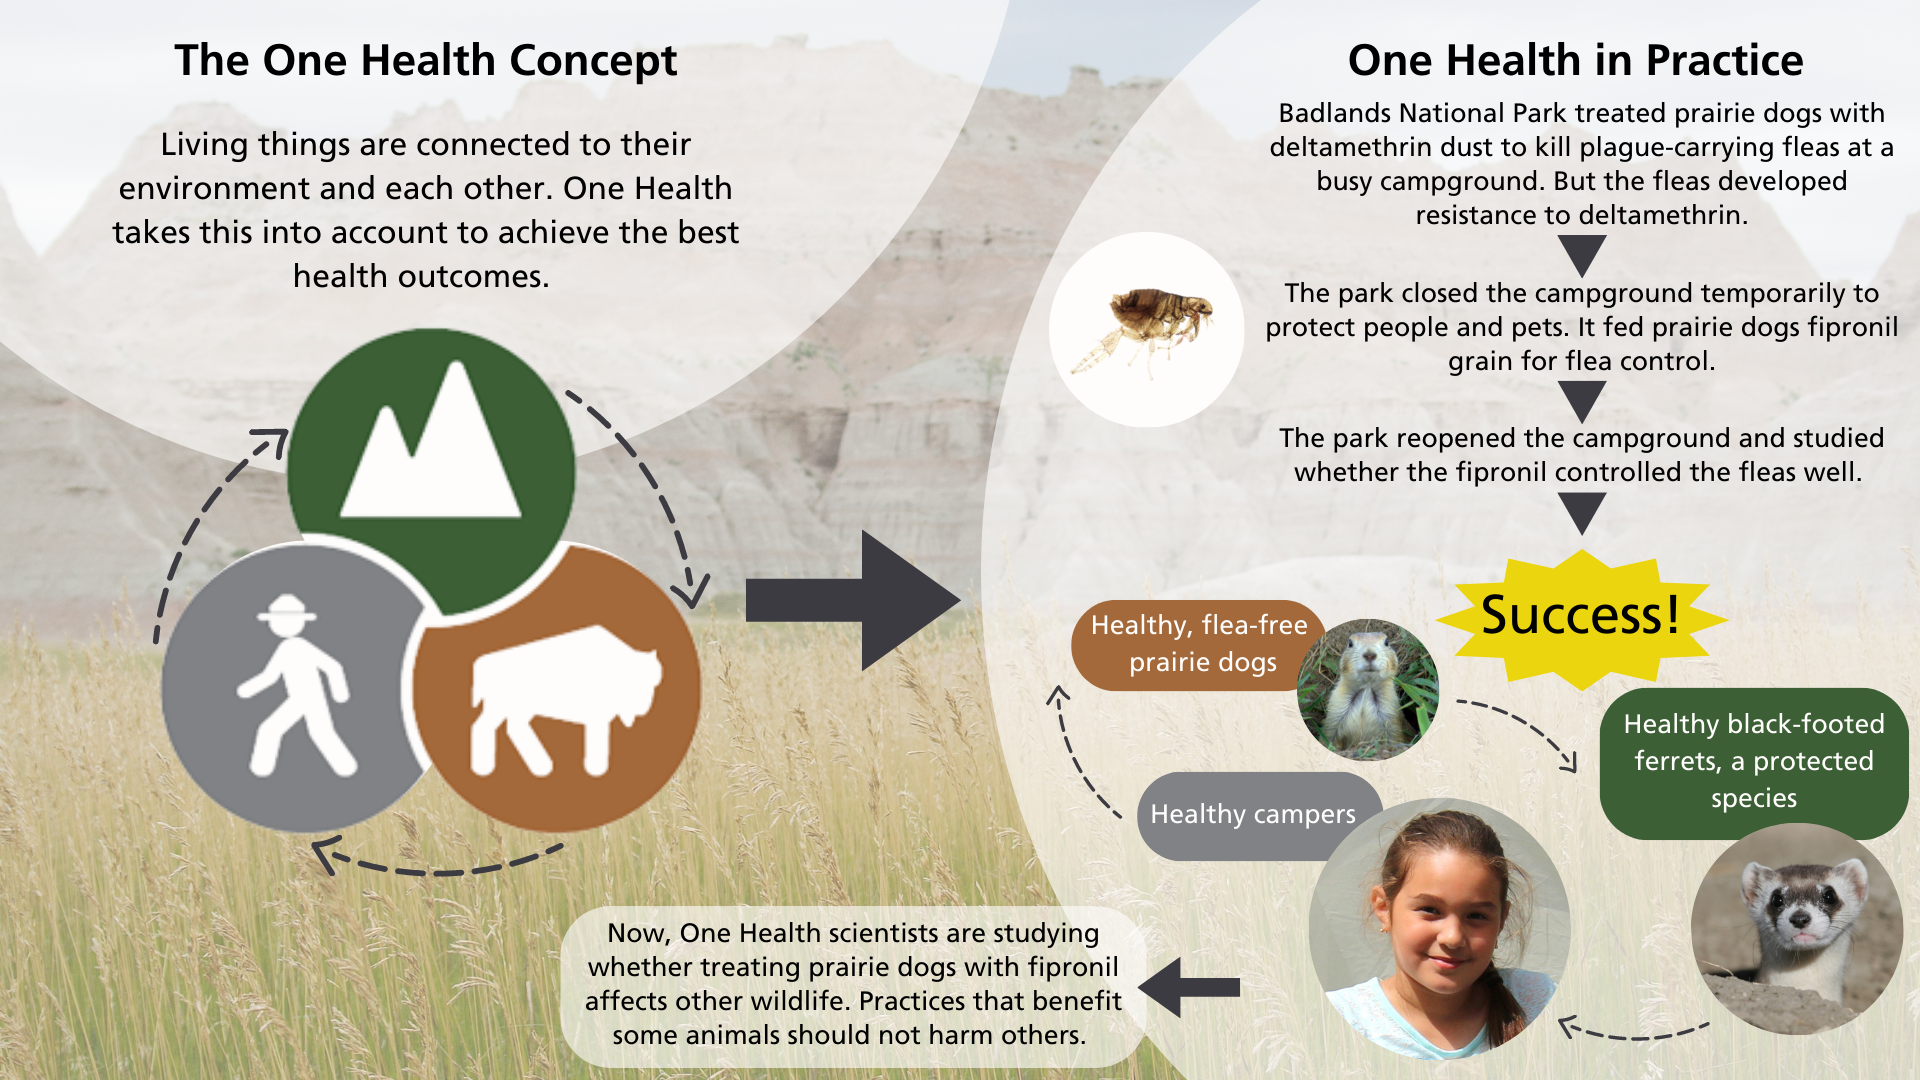 Graphic illustrating One Health in concept and practice against a backdrop photo of grasslands backed by towering layered rock formations.